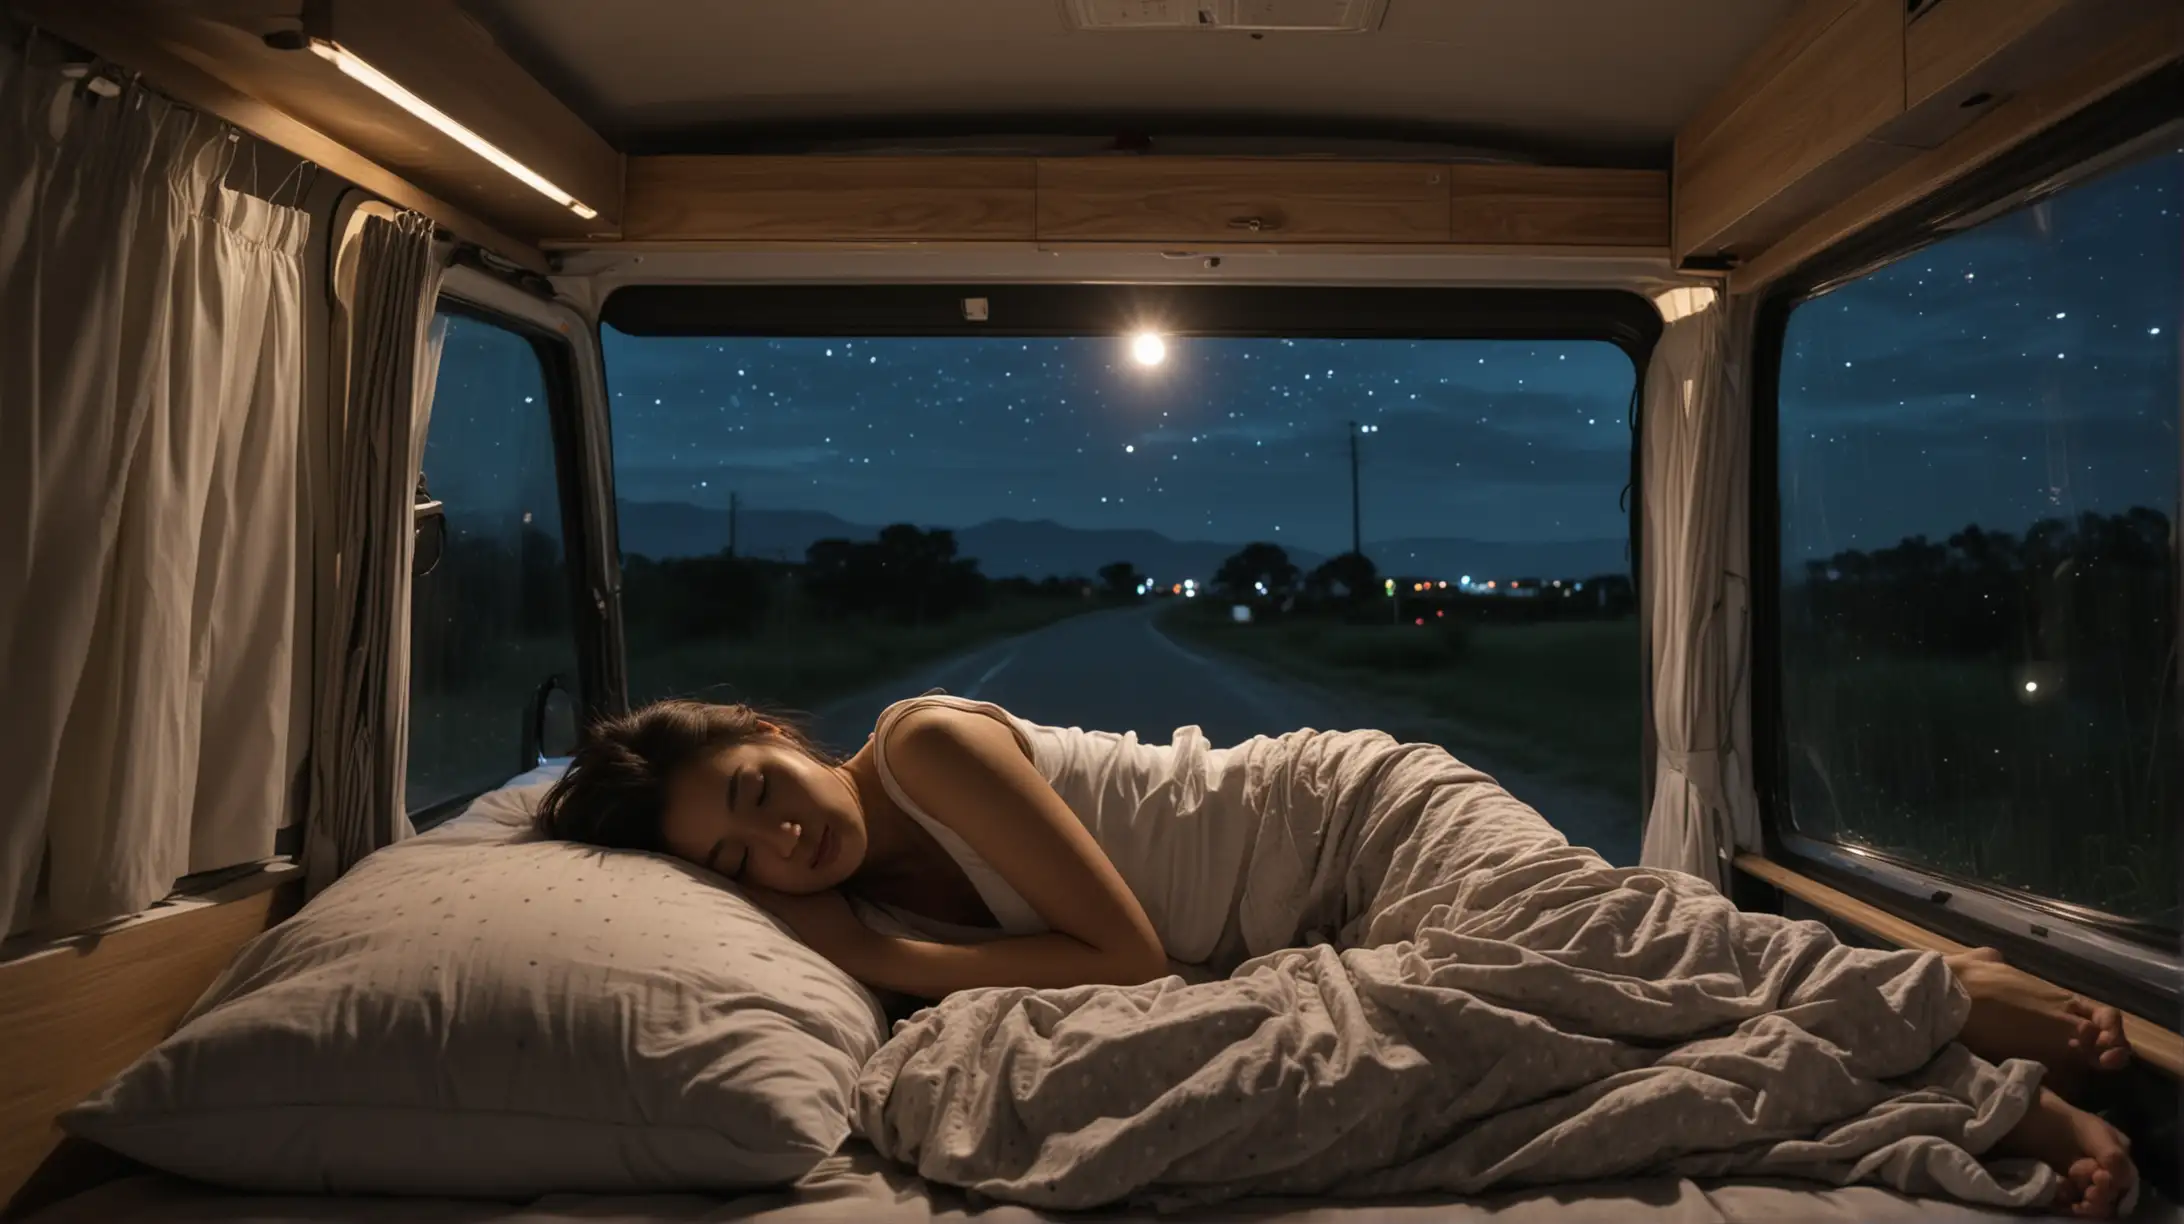 an beautiful asian woman peacefully sleeps in a camper van at night. The scene is dark Through the windows, a road leading off into the distance is visible, hinting at the tranquility of the surroundings. body stretched out and lieing down flat with head on pillow, the womans head resting on a pillow.  Capture the serenity and coziness of the moment